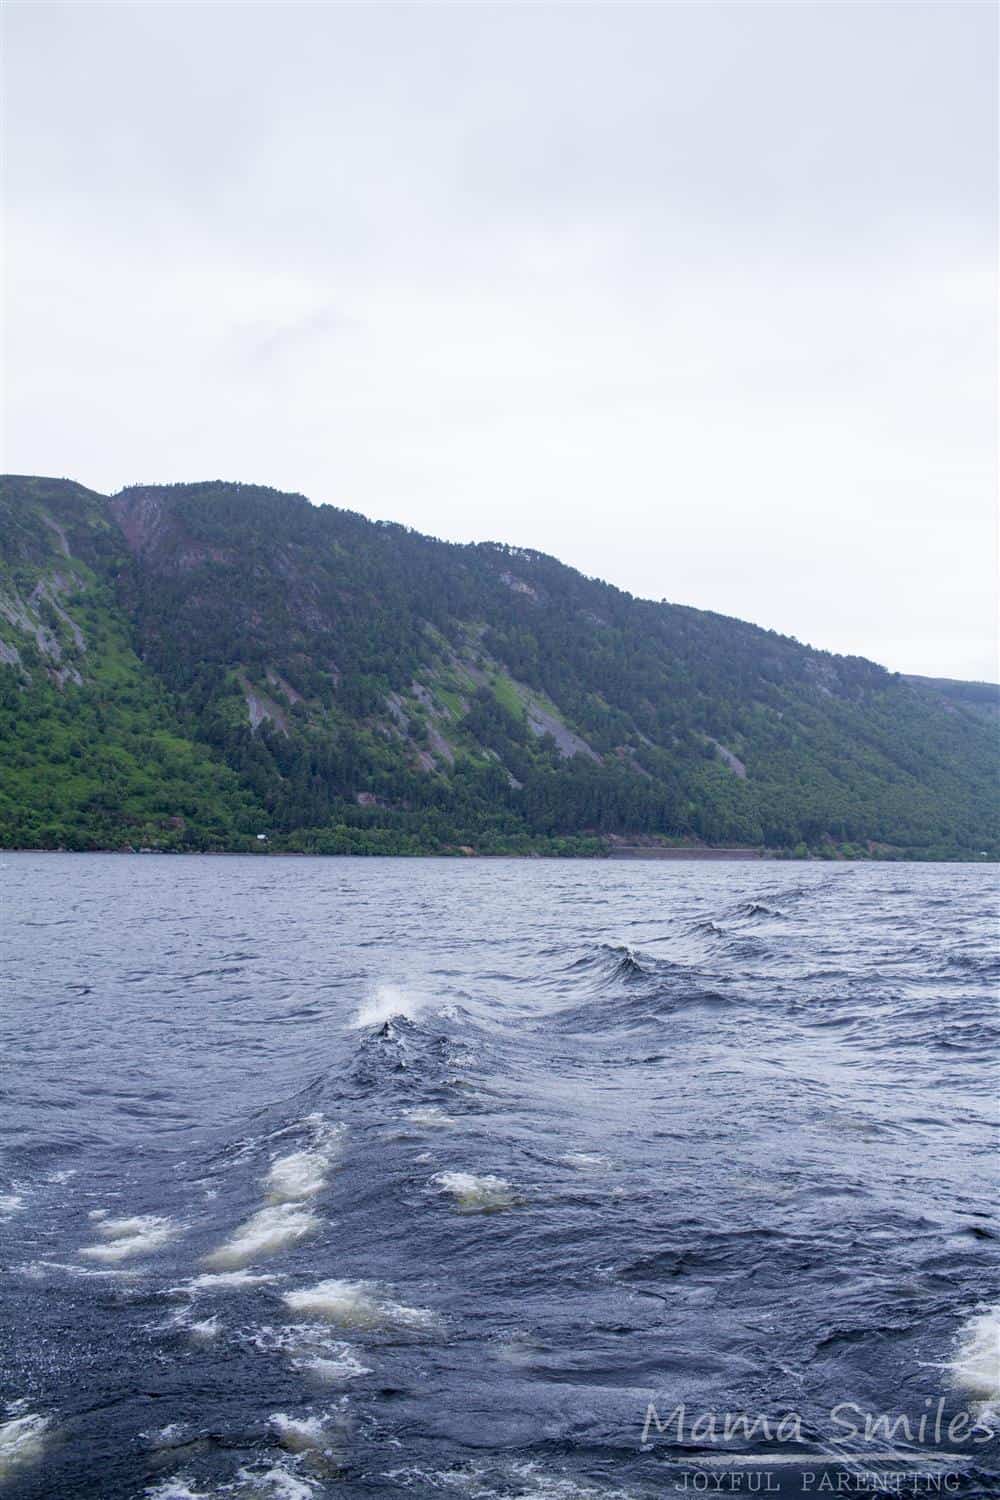 Is that Nessie under those choppy waters? Great tips here for visiting Loch Ness with kids